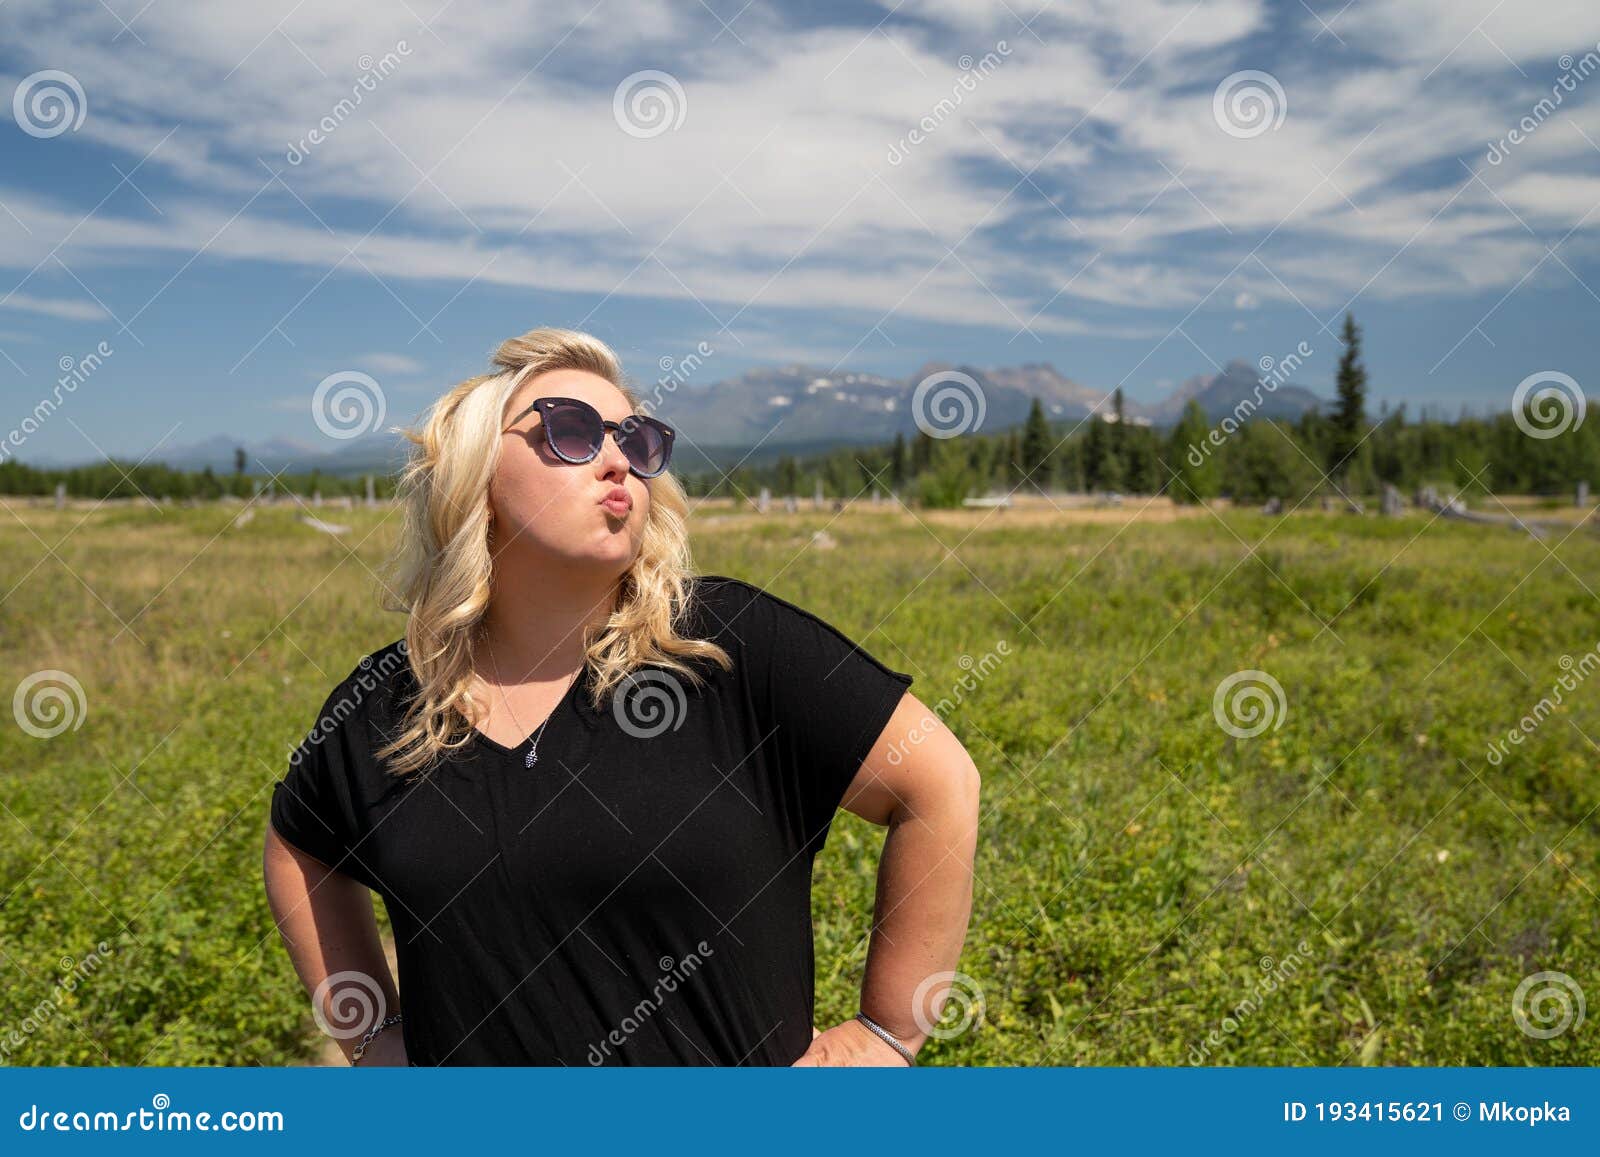 obnoxious blonde woman does a duck face with pouting lips, hands on hips, in glacier national park, near polebridge, montana, in a